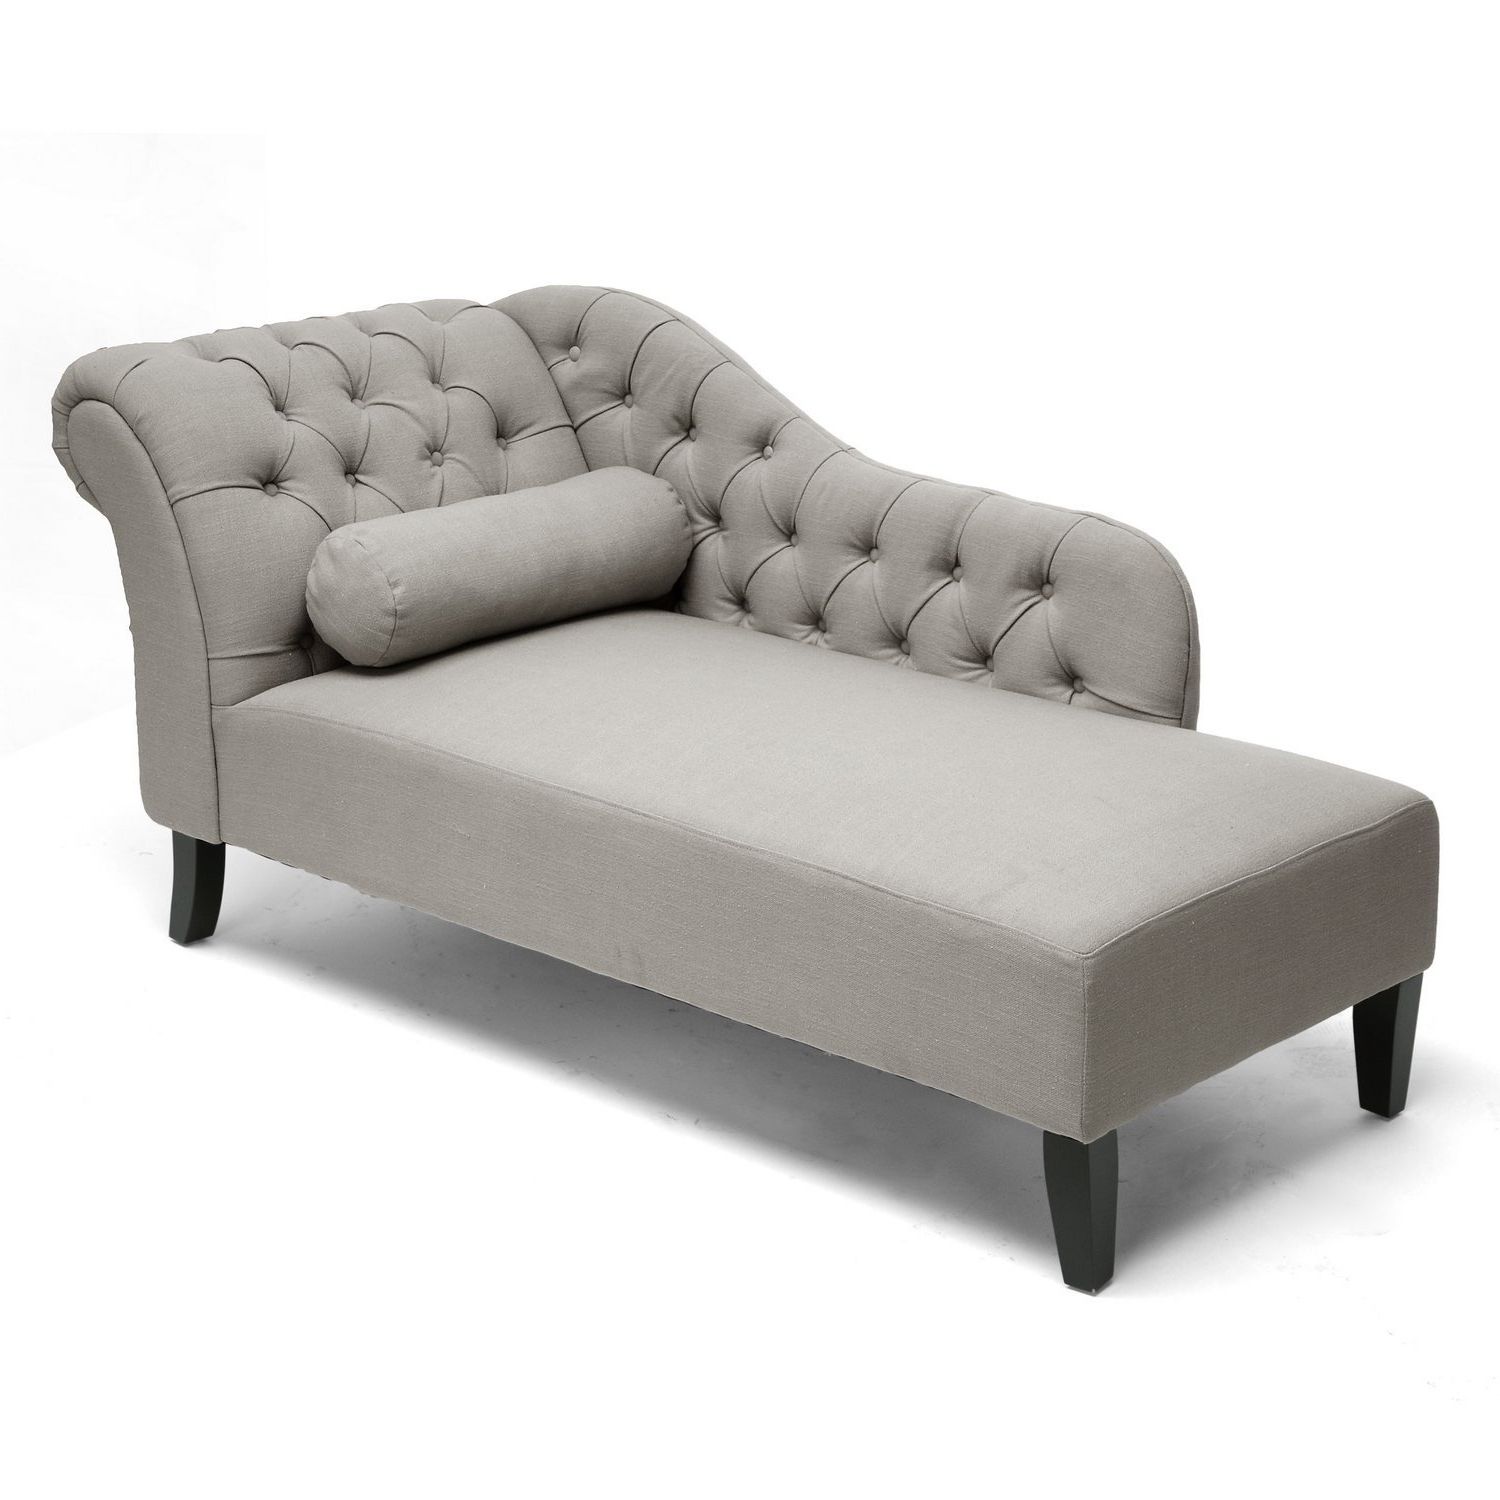 Best And Newest Chaise Lounges With Arms Inside Amazon: Baxton Studio Aphrodite Tufted Putty Linen Modern (Photo 2 of 15)